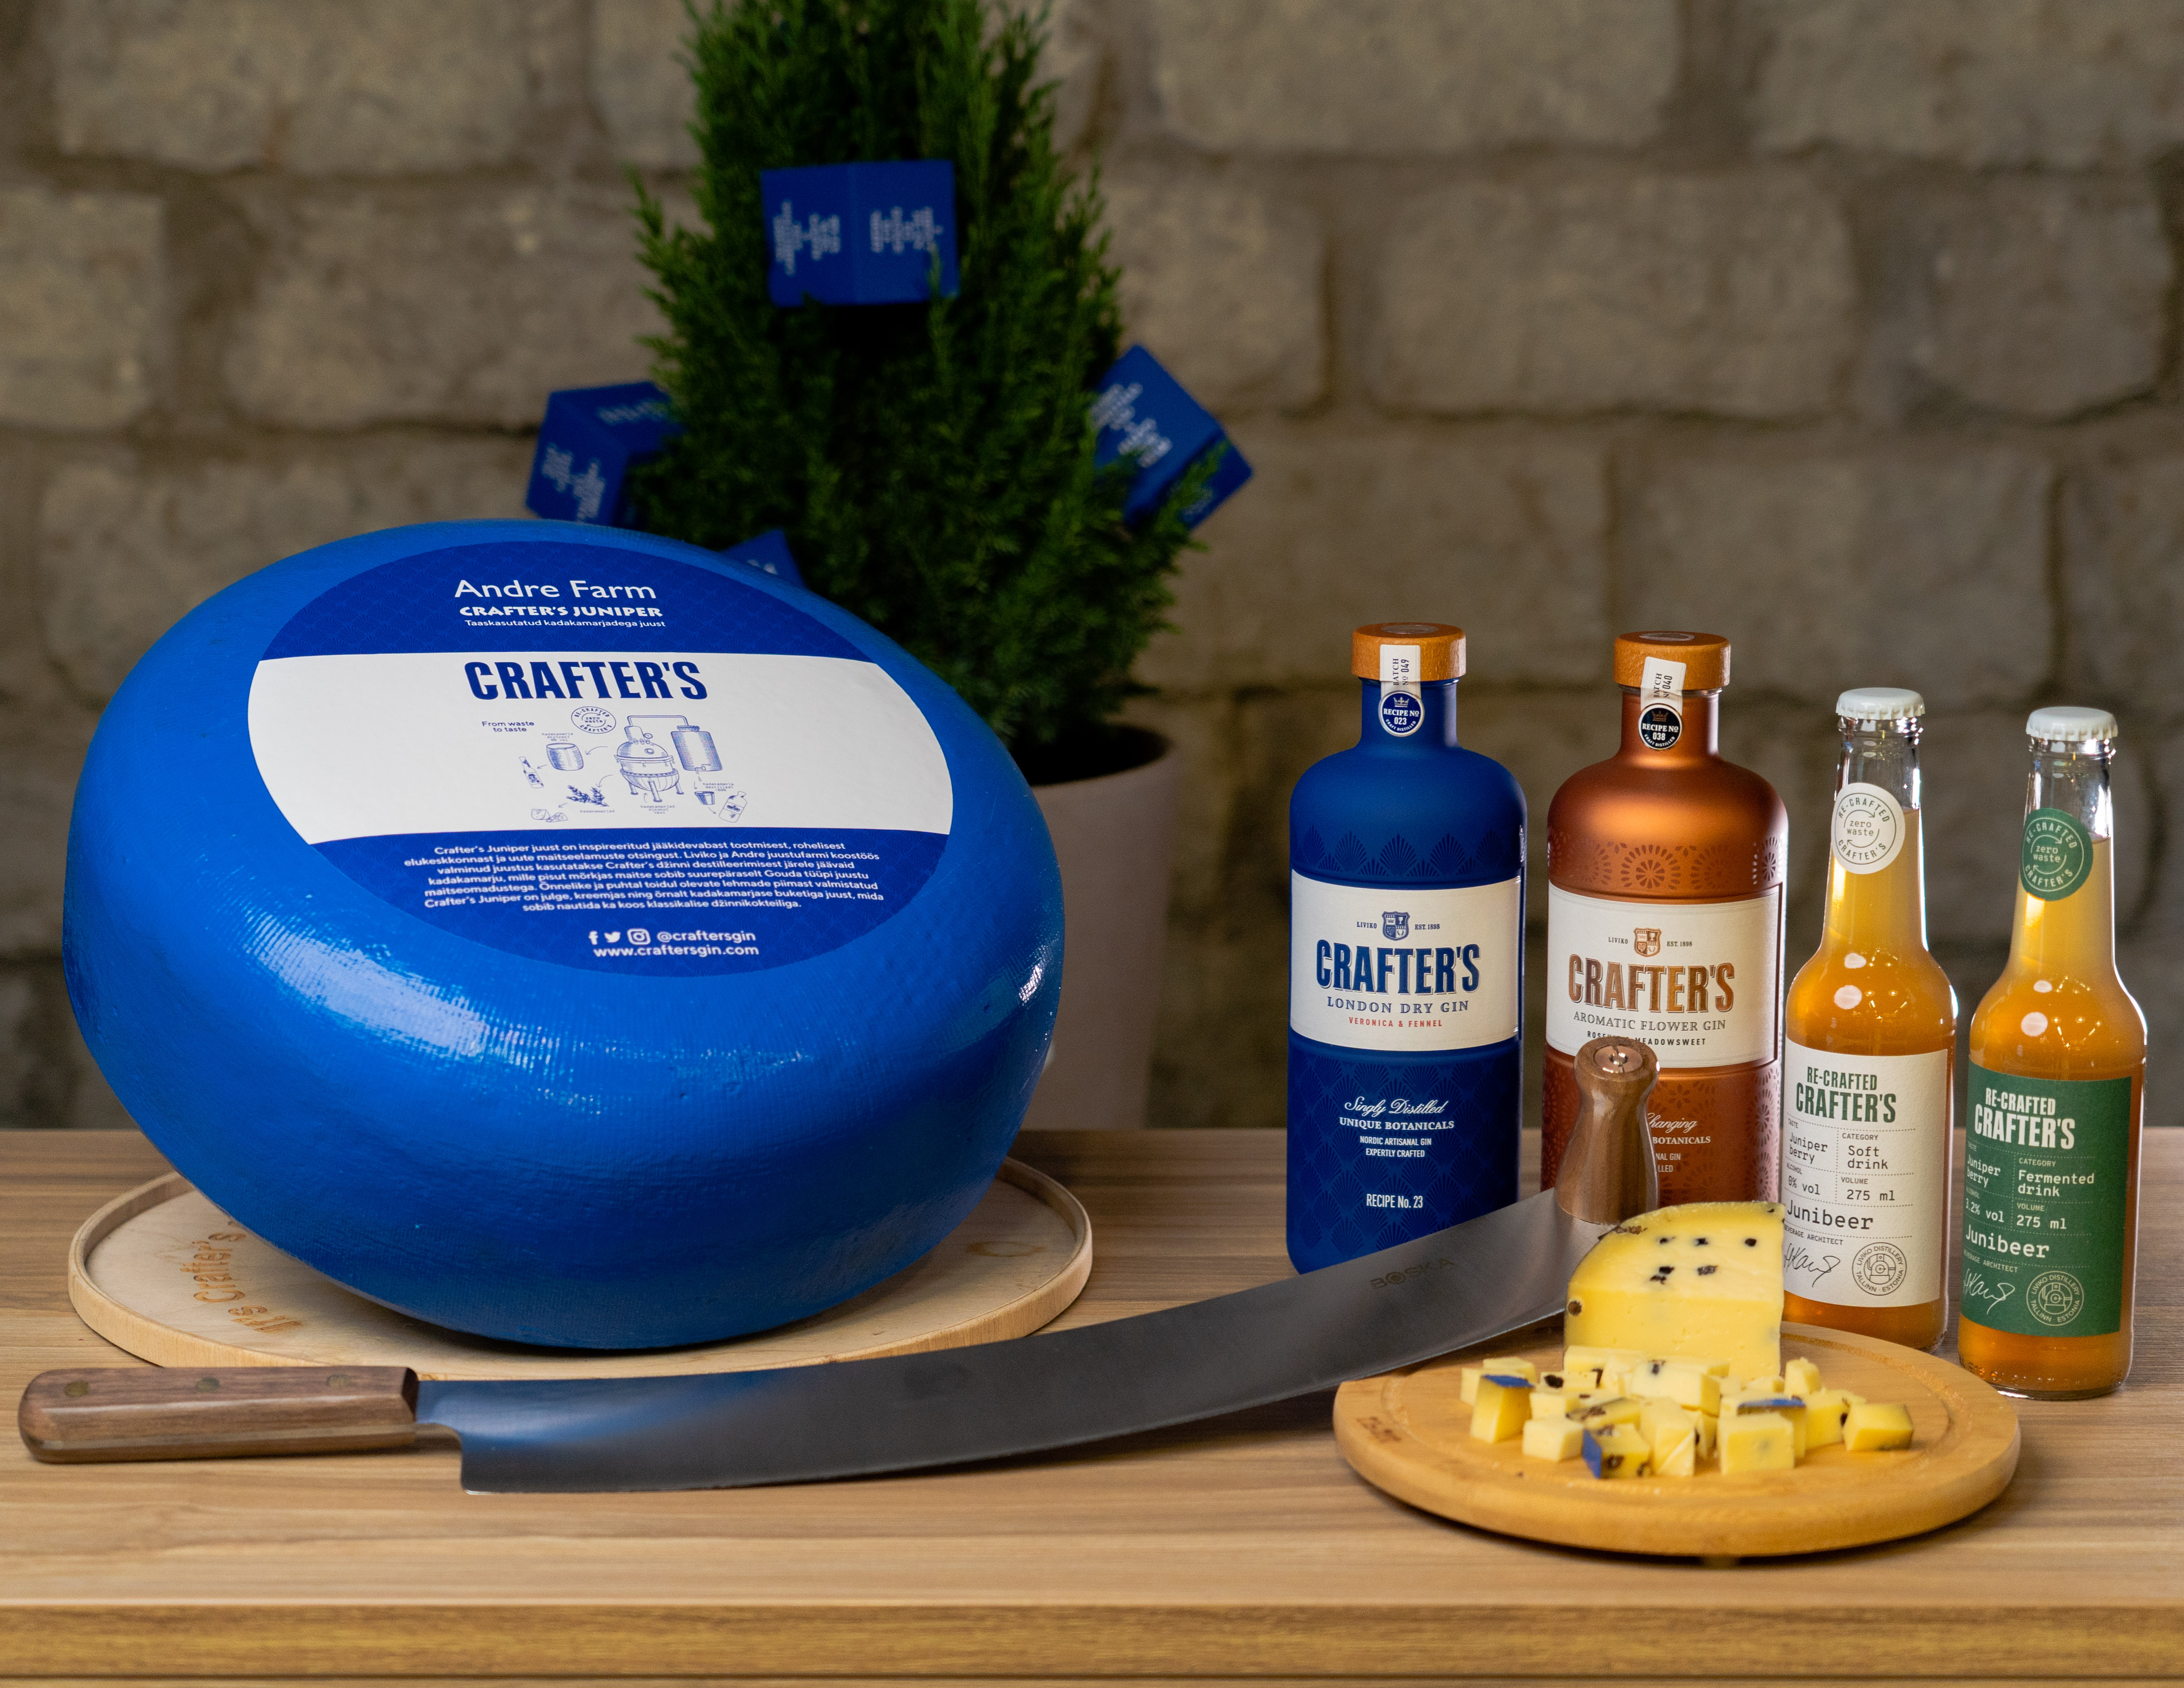 Crafter's gin and Re-crafted Crafter's soft drinks with the new Crafter's Juniper cheese from Andre Farm